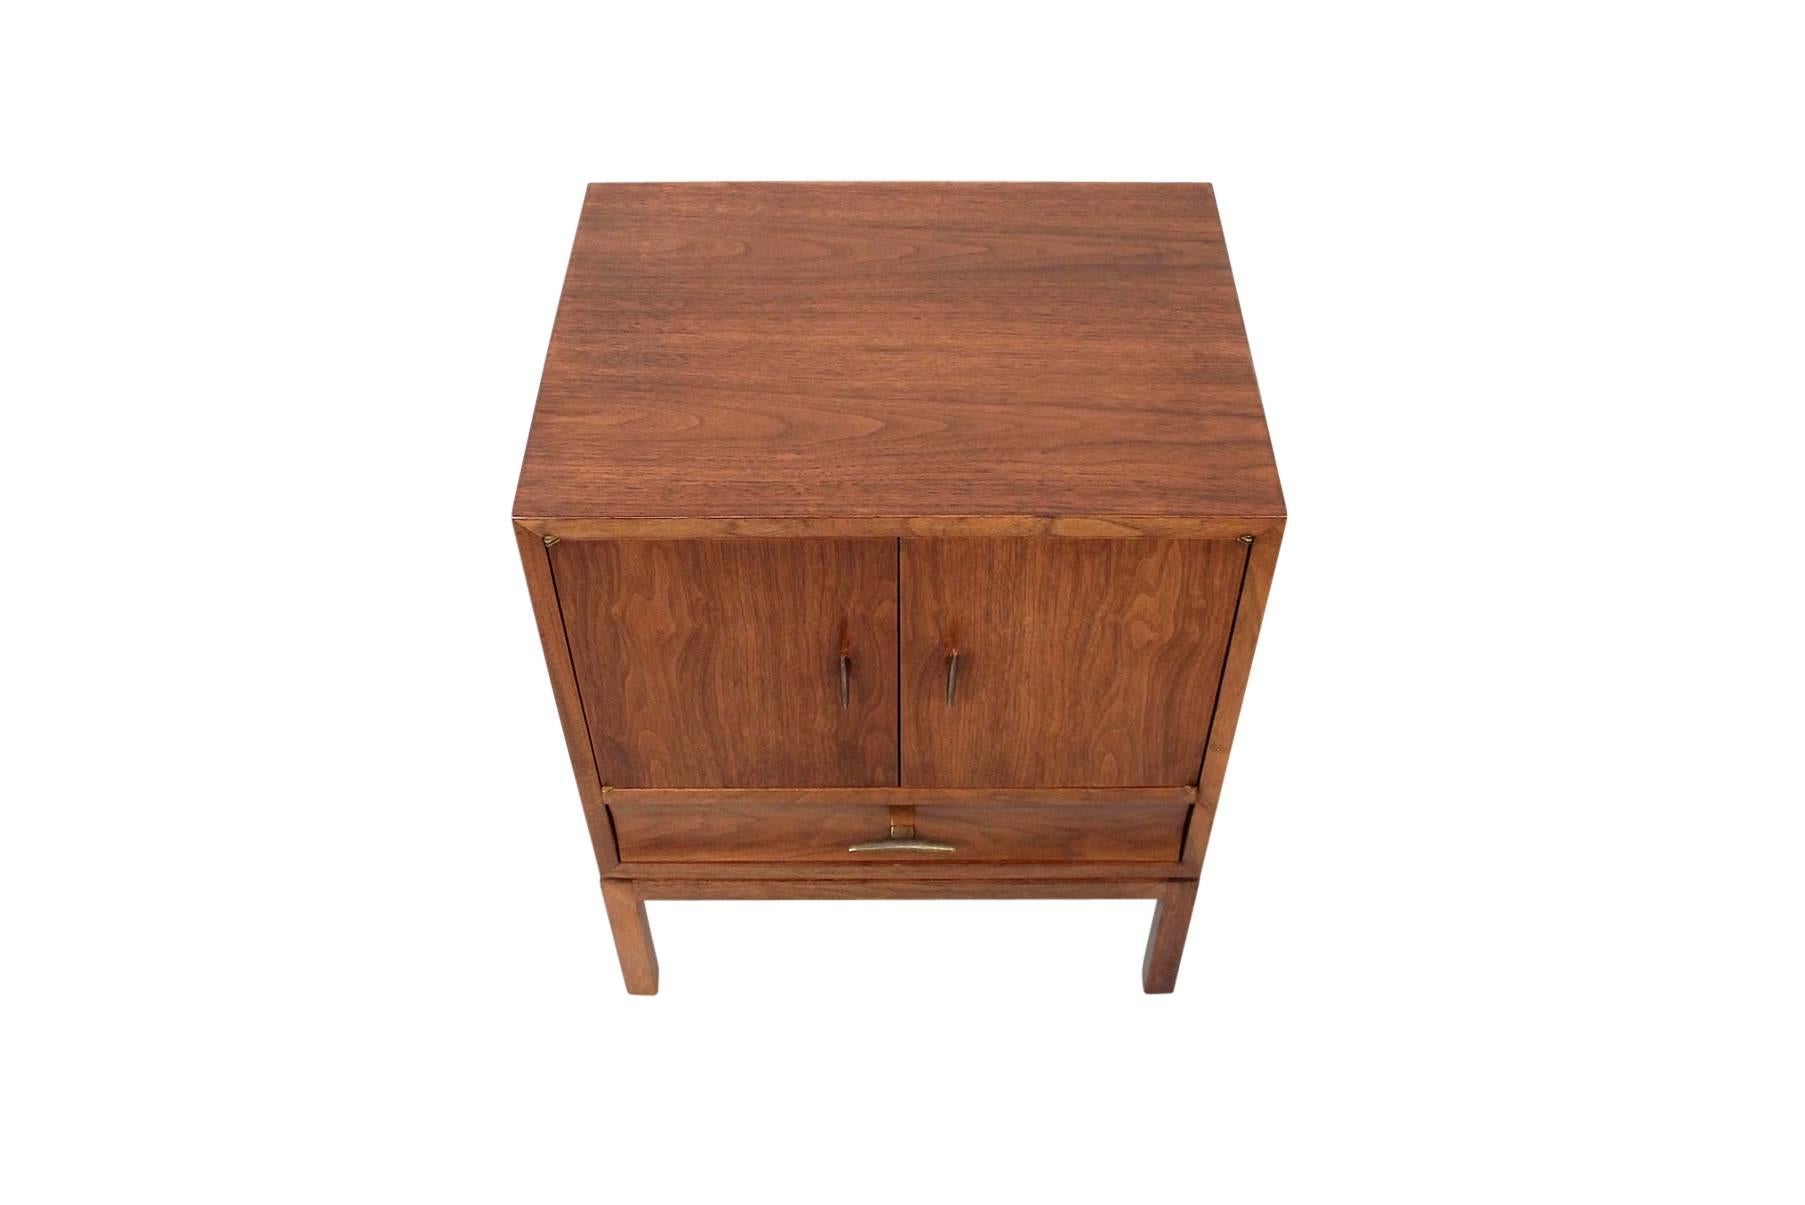 Mid-20th Century Pair of Nightstands by Edward Wormley for Dunbar